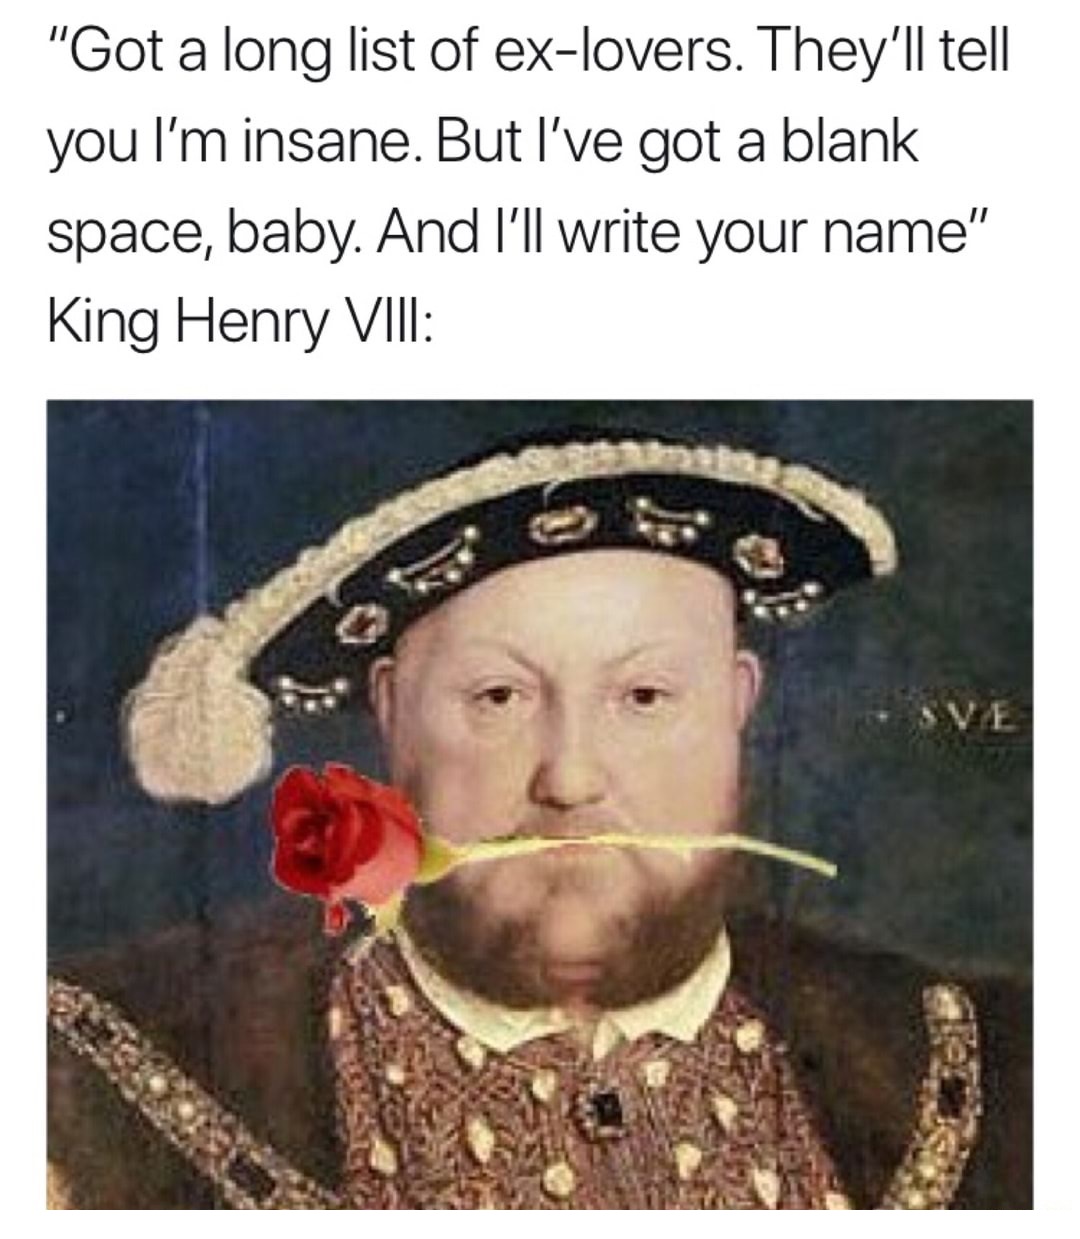 meme stream - king henry viii memes - "Got a long list of exlovers. They'll tell you I'm insane. But I've got a blank space, baby. And I'll write your name" King Henry Viii